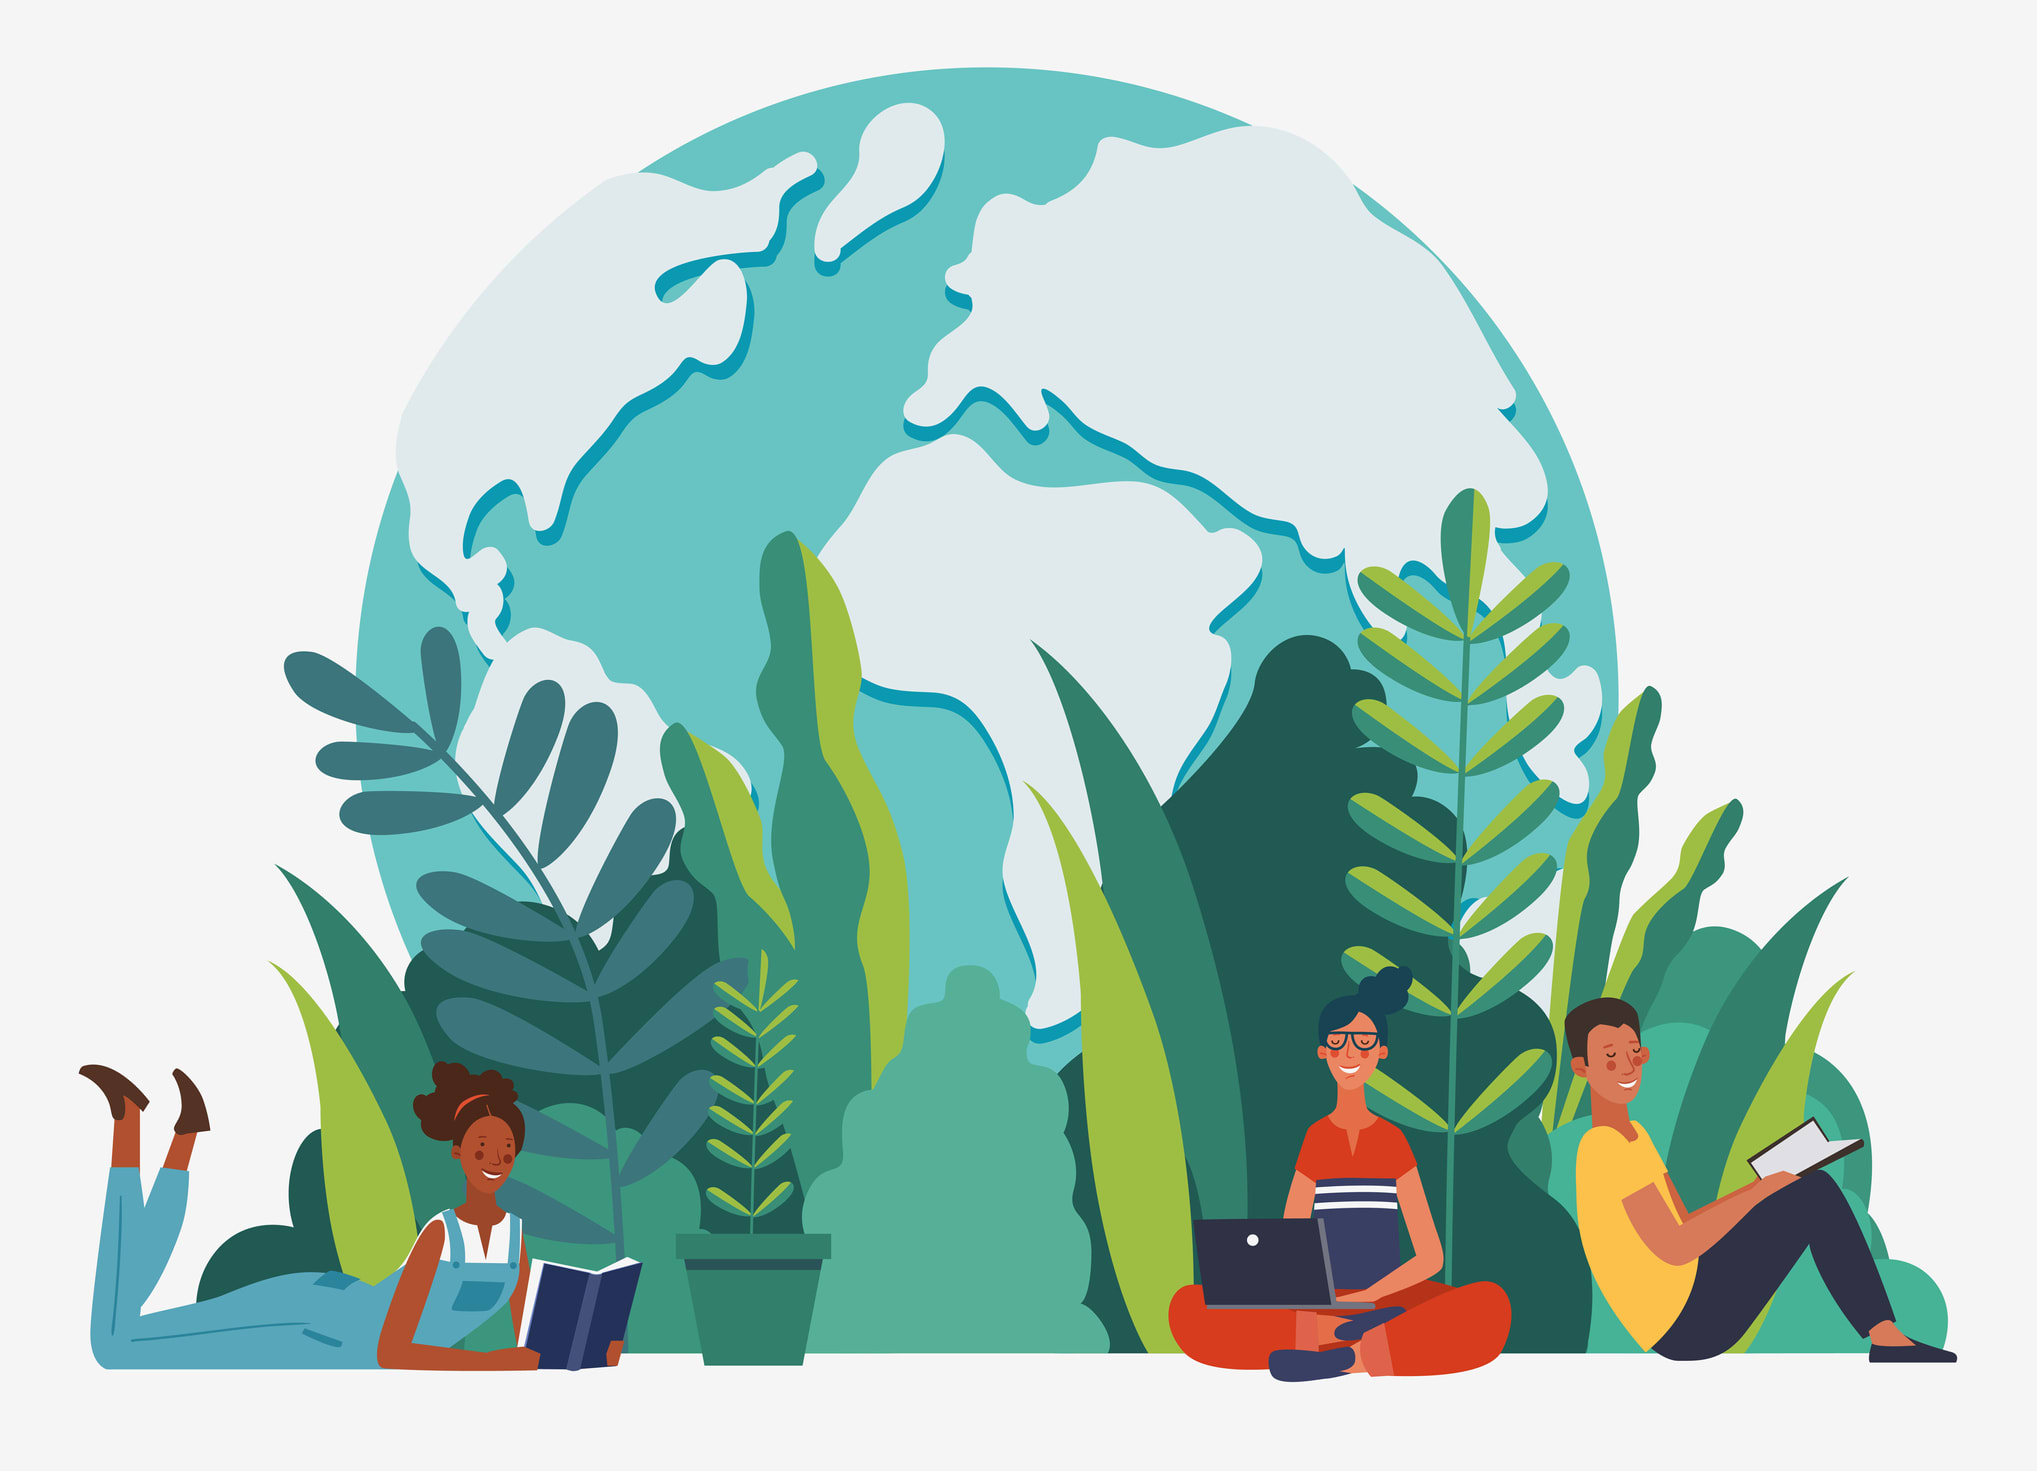 Young people group reading books. Study, learning knowledge and education vector concept. Eco friendly ecology poster. Nature conservation illustration